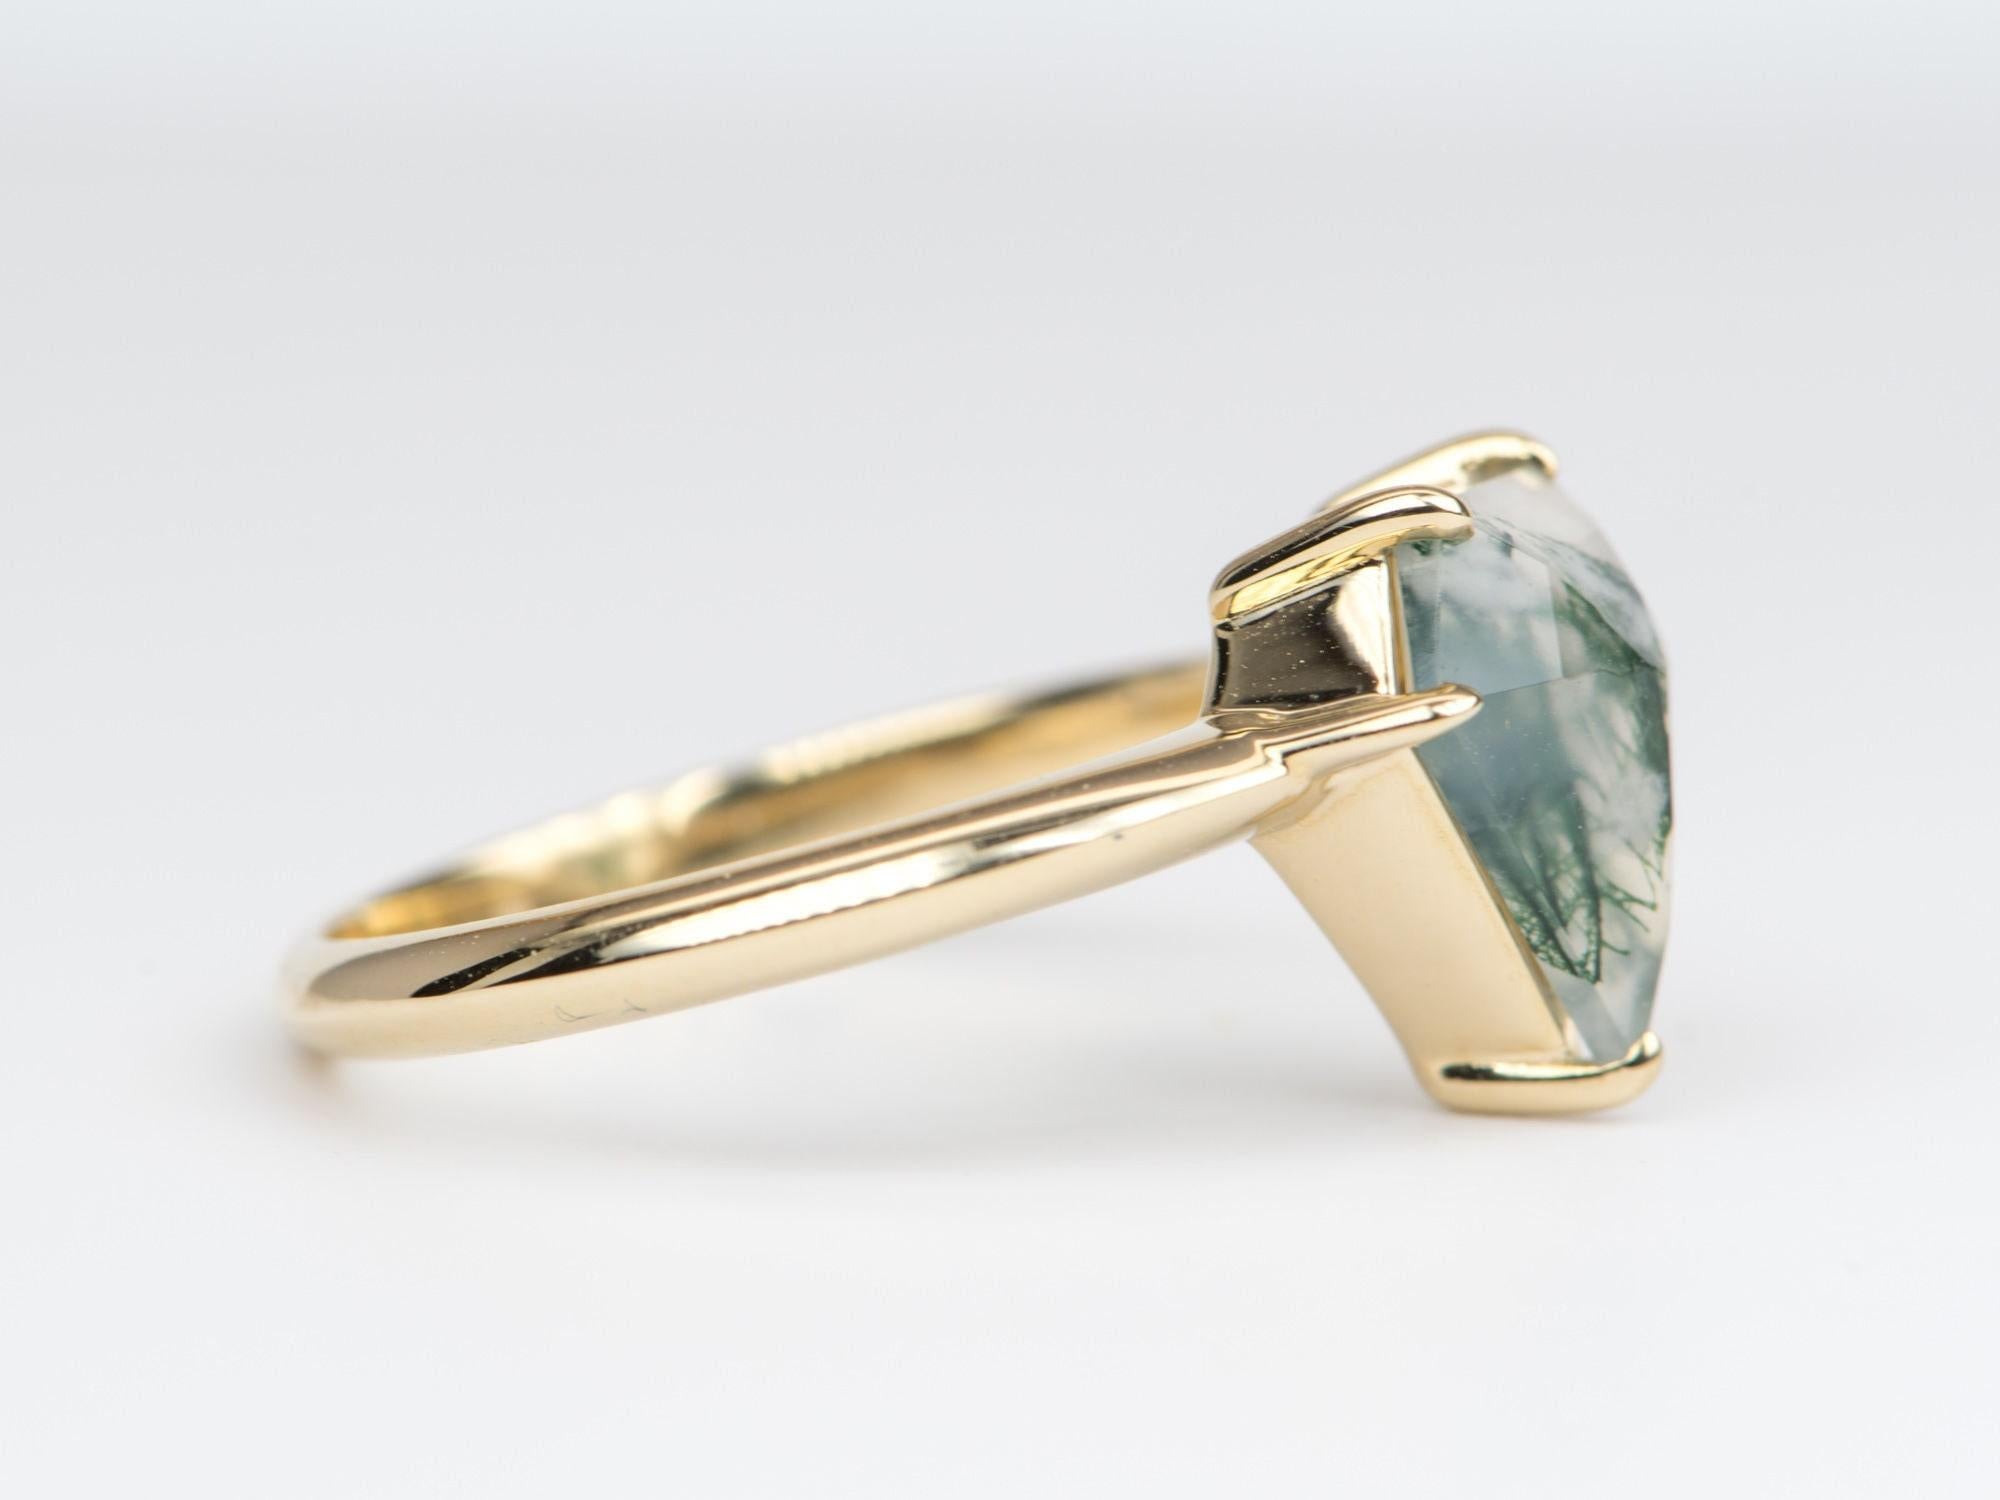 ♥ Solid 14K yellow gold ring set with a shield-shaped moss agate center stone secured with claw prongs
♥ The overall setting measures 11.3mm in width, 11.4mm in length, and sits 6.3mm tall from the finger


♥ US Size 7 (Free resizing up or down 1